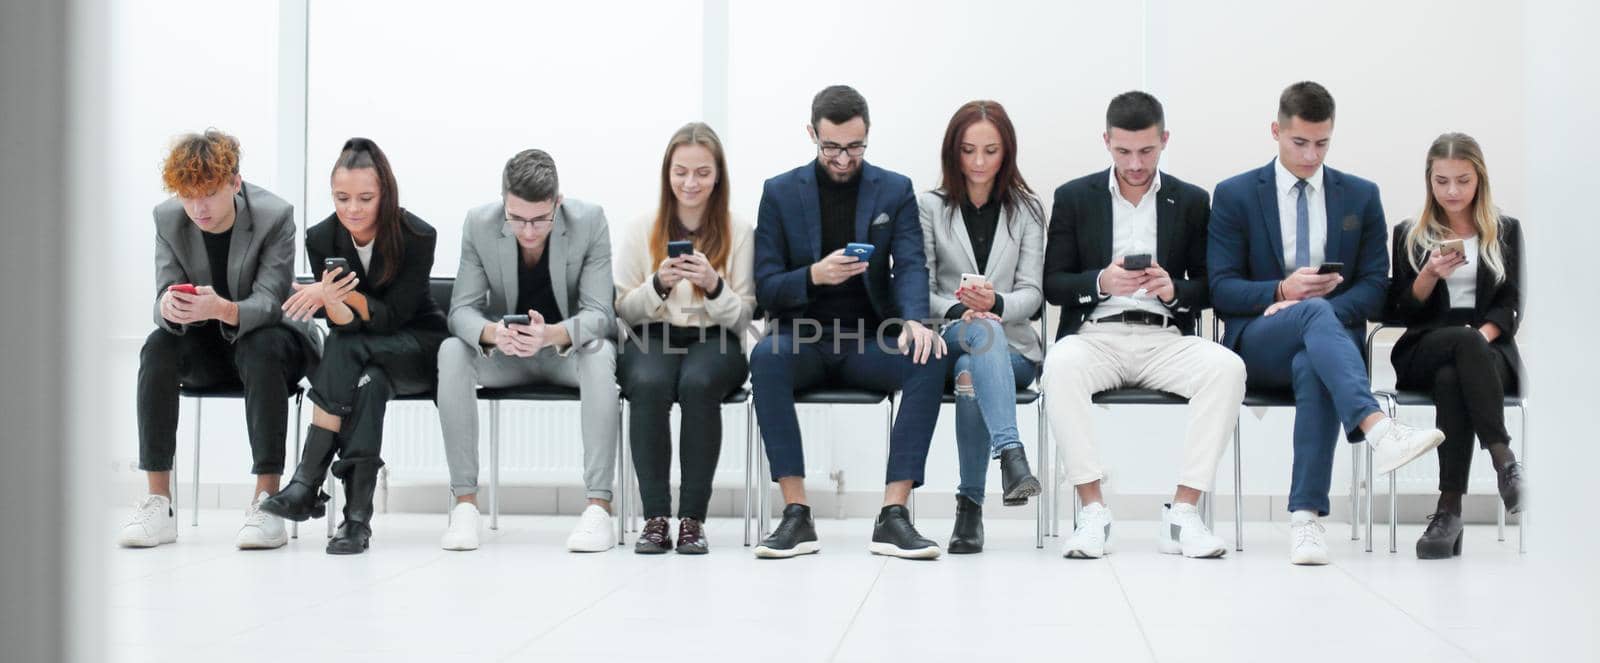 group of diverse young business people looking at their smartphone screens. by asdf